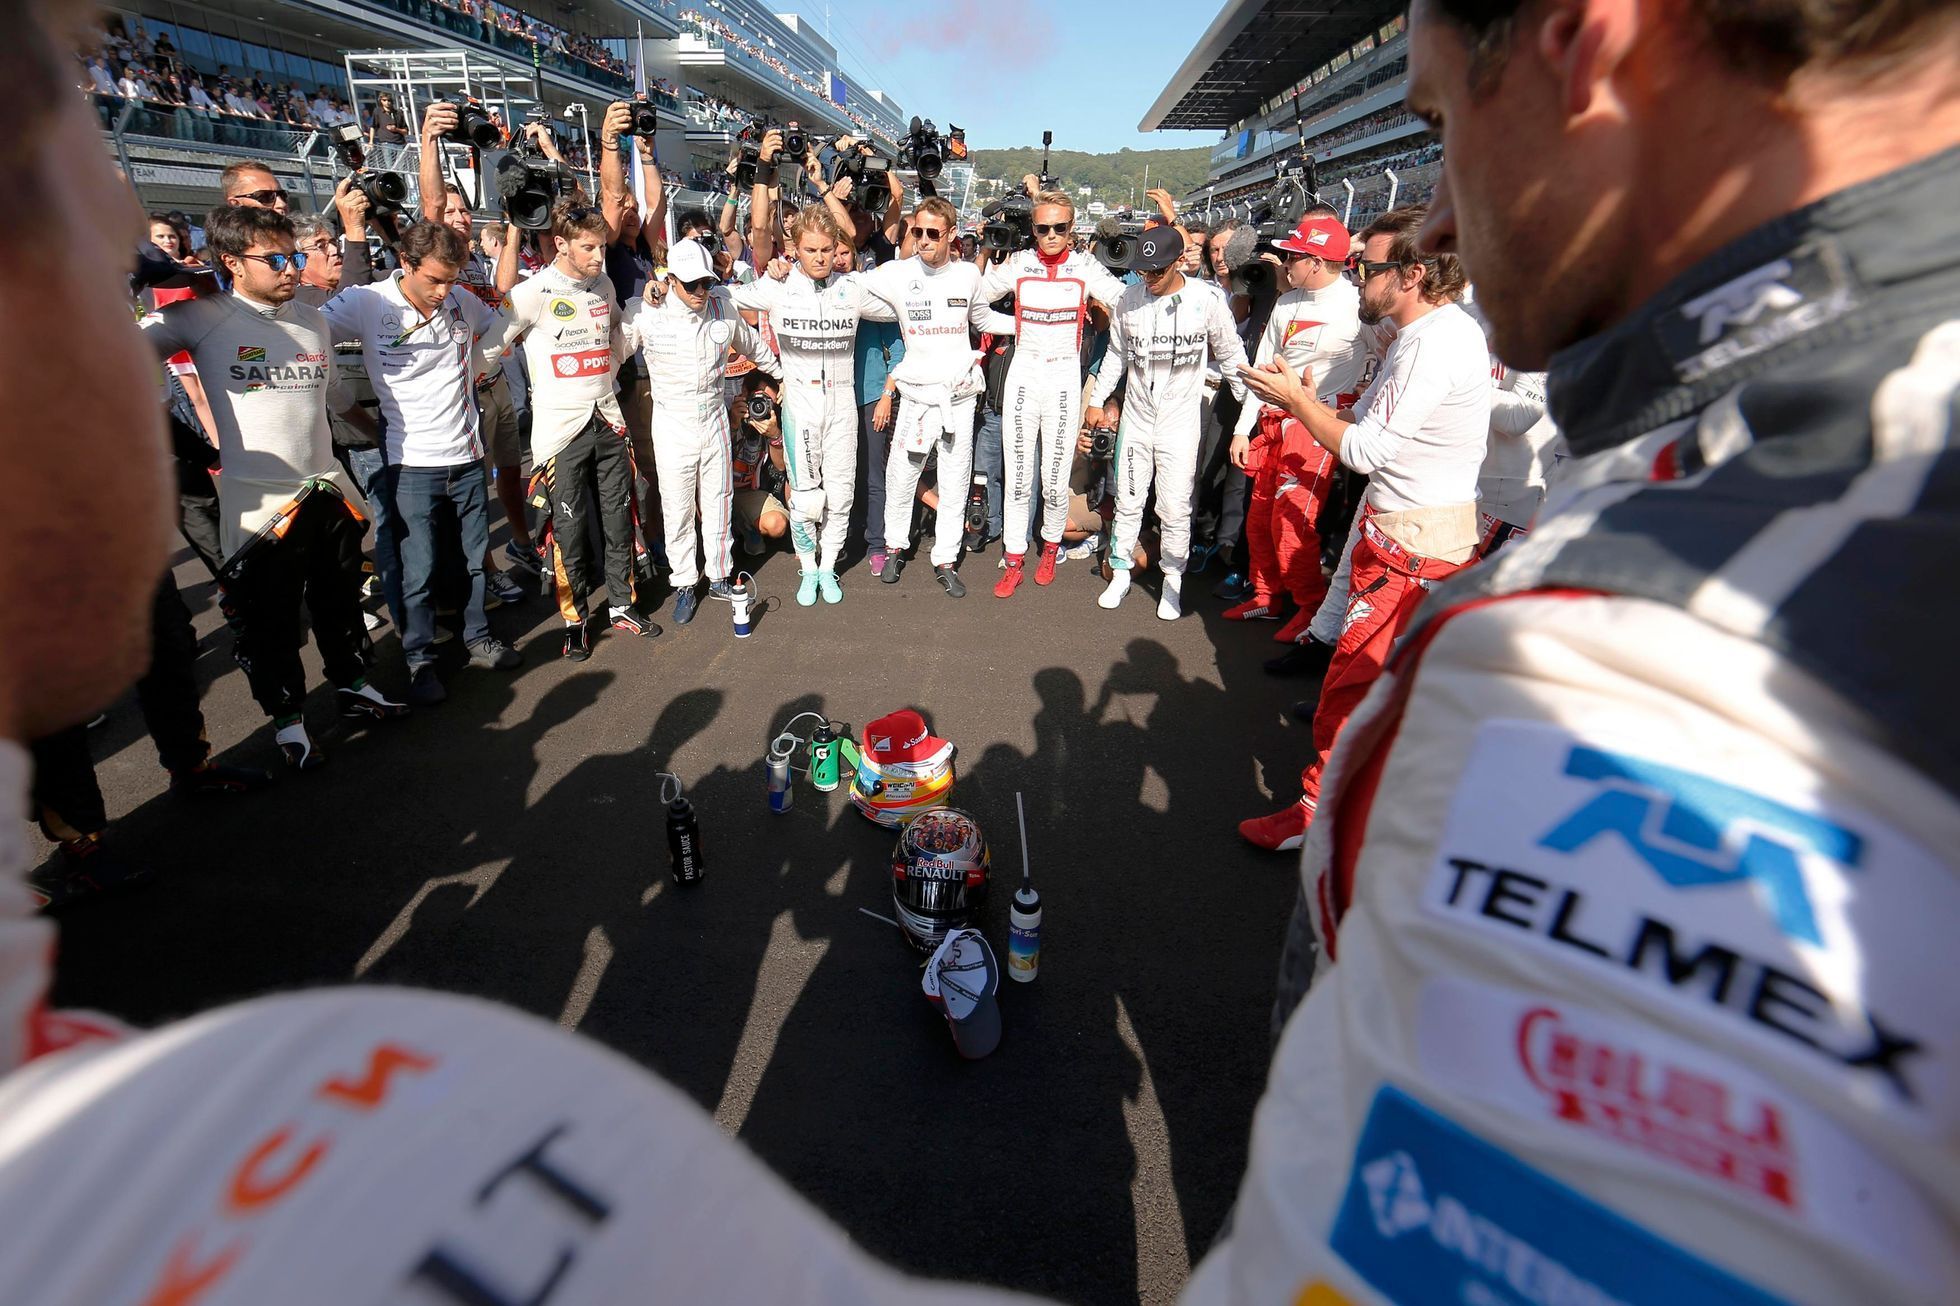 Formula One drivers pray for Marussia Formula One driver Bianchi of France who had an accident in the previous race, before the first Russian Grand Prix in Sochi